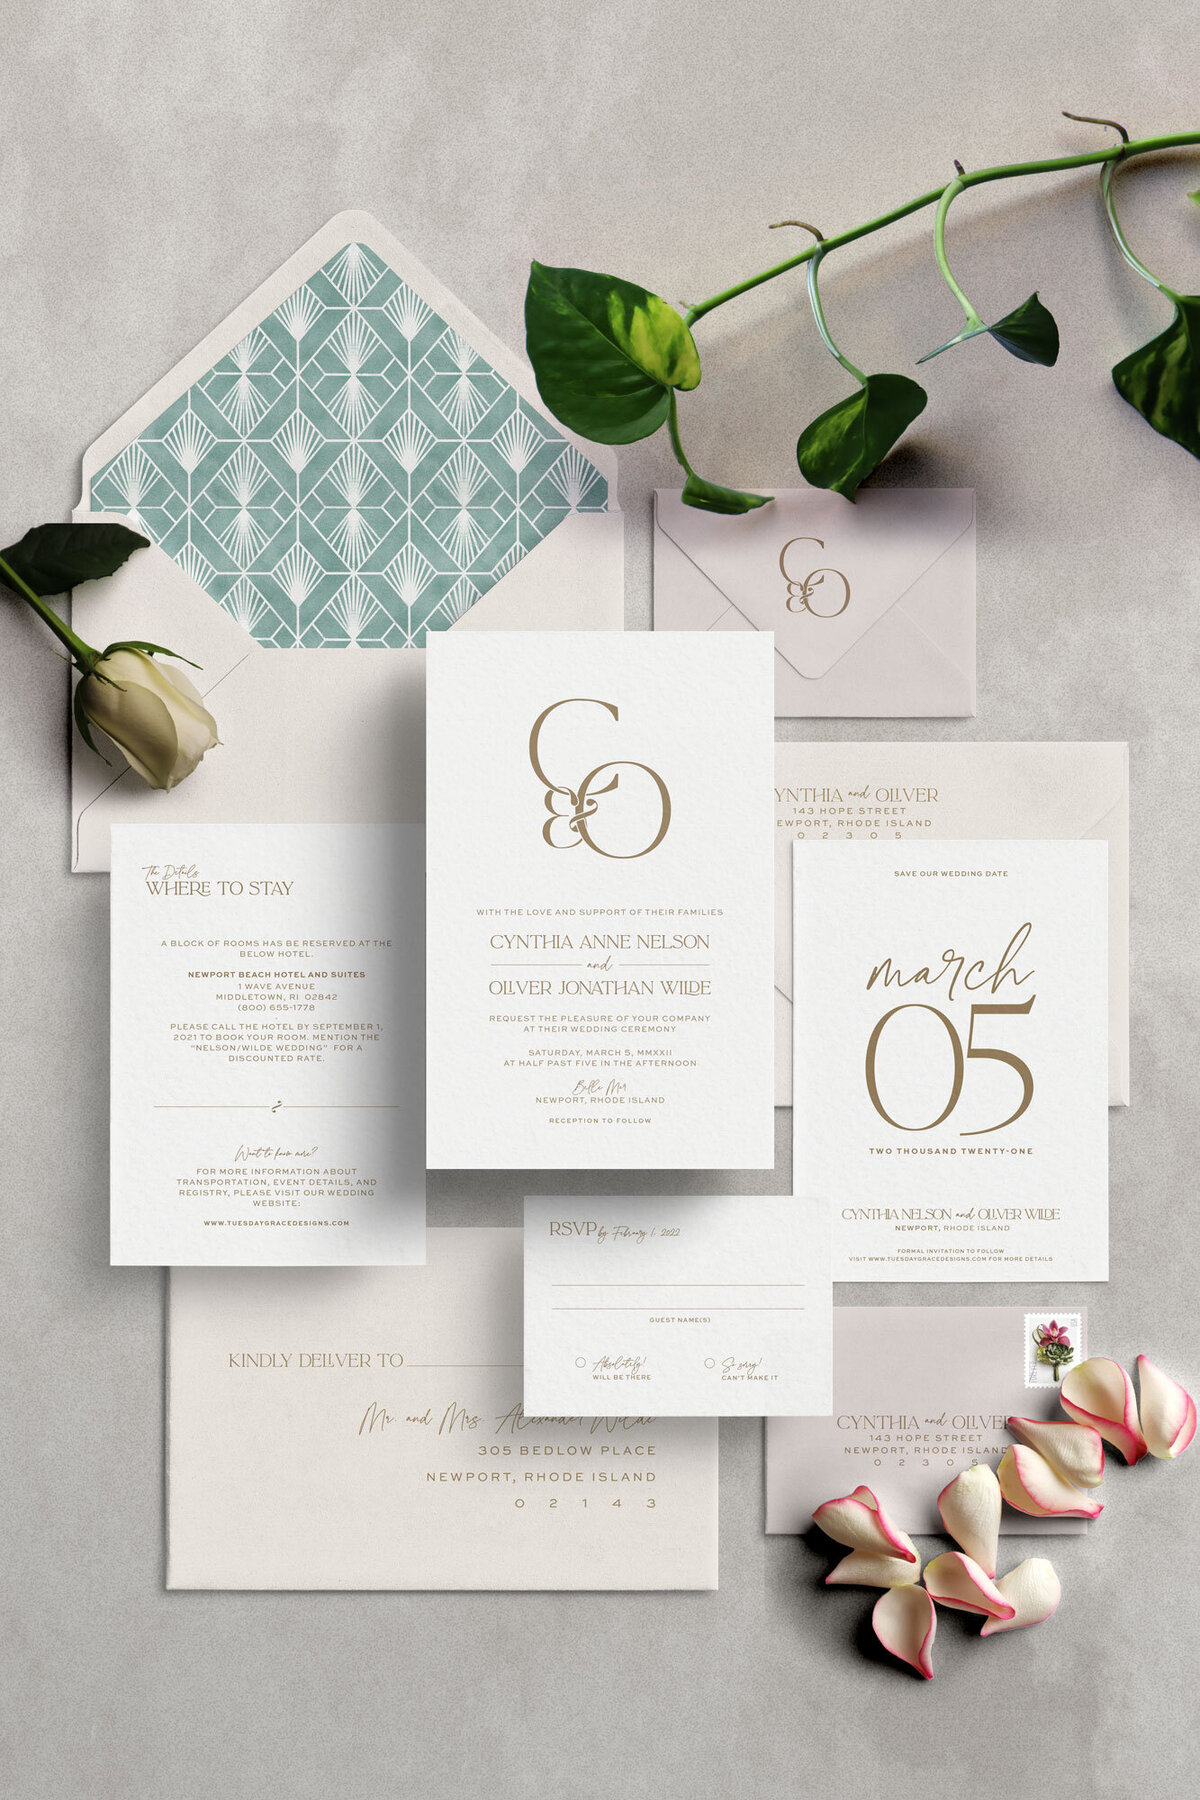 Jupiter Florida wedding invitations for wedding at Blowing Rocks. Invitations with holographic foil.